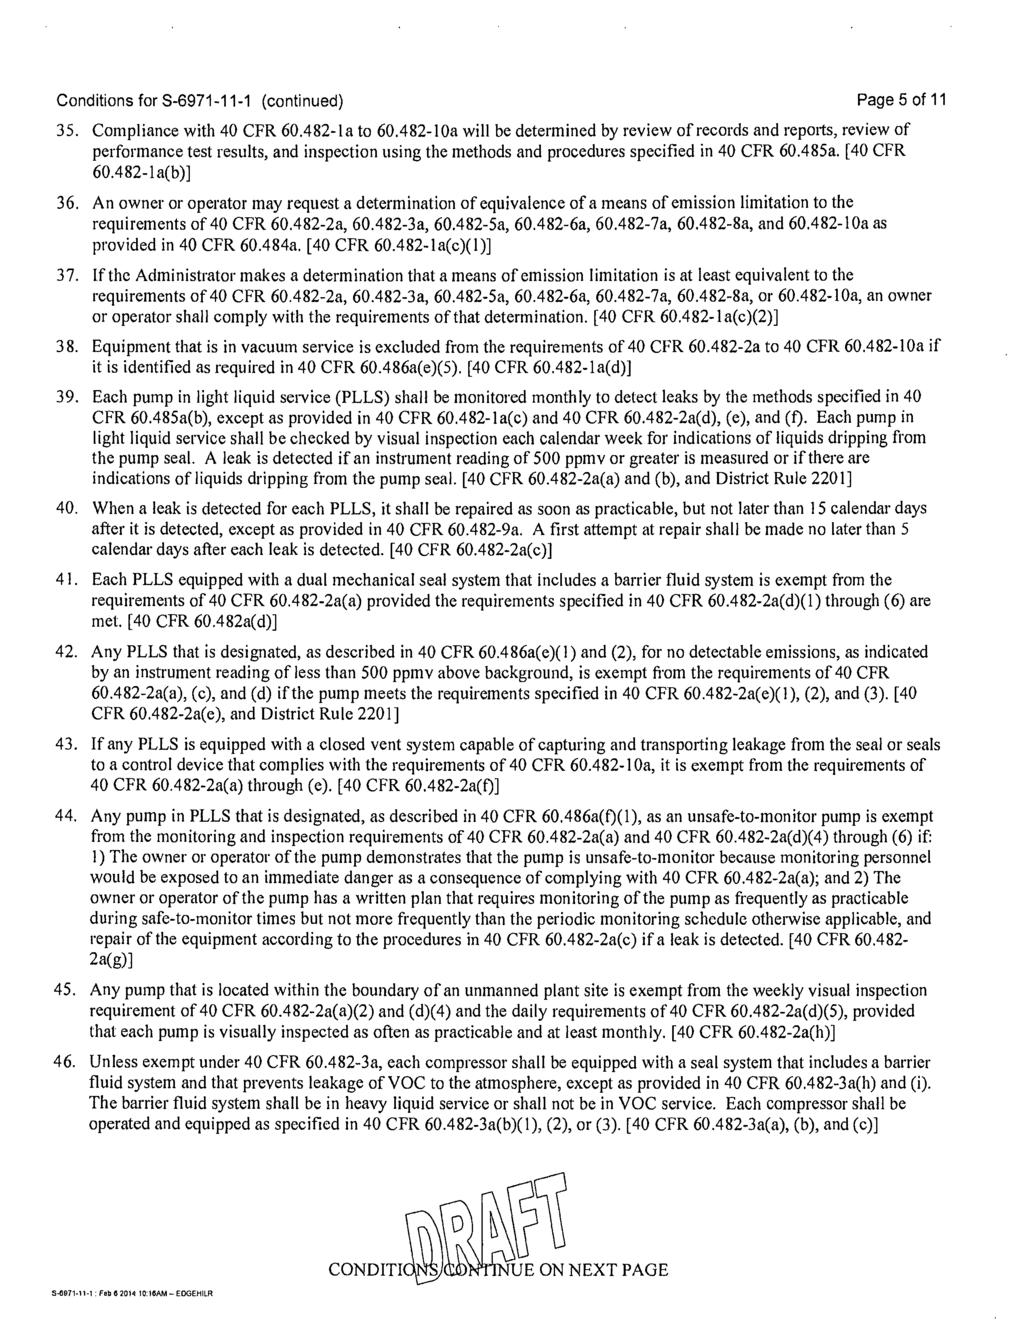 Conditions for S-6971-11-1 (continued) Page 5 of 11 35. Compliance with 40 CFR 60.482-la to 60.